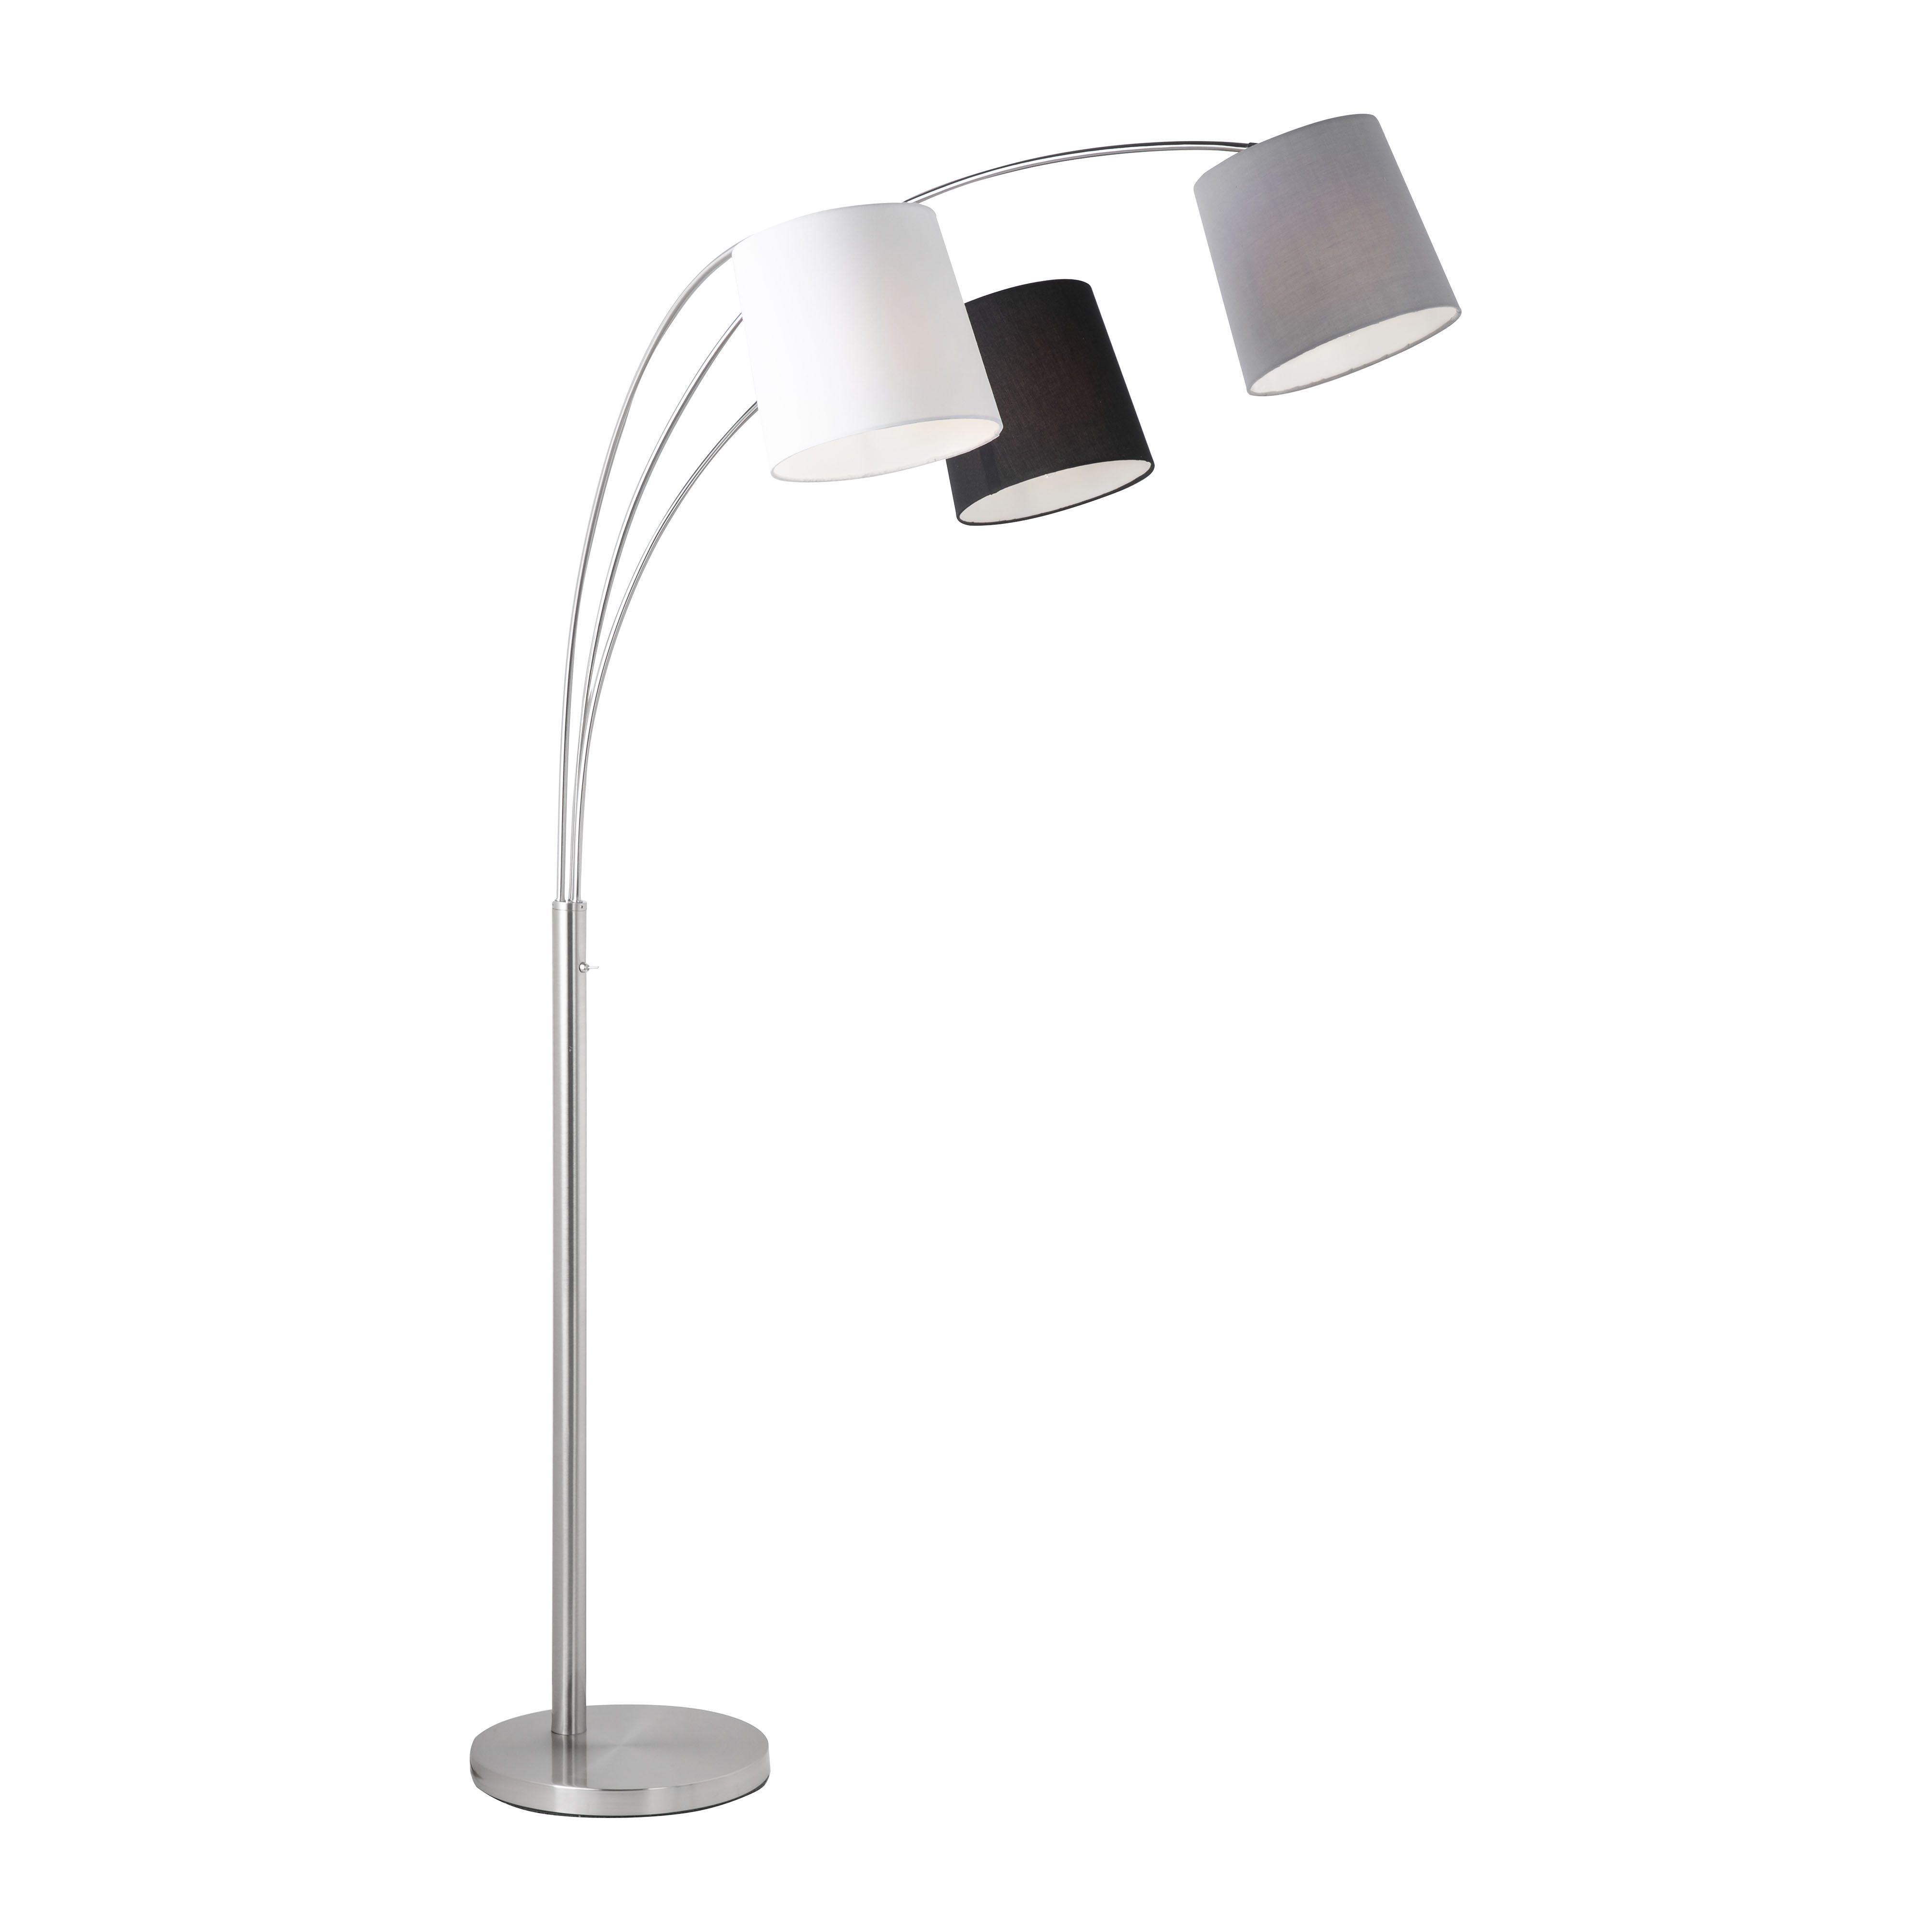 Lampadaire led design visage deluxe MAGNETICLAND